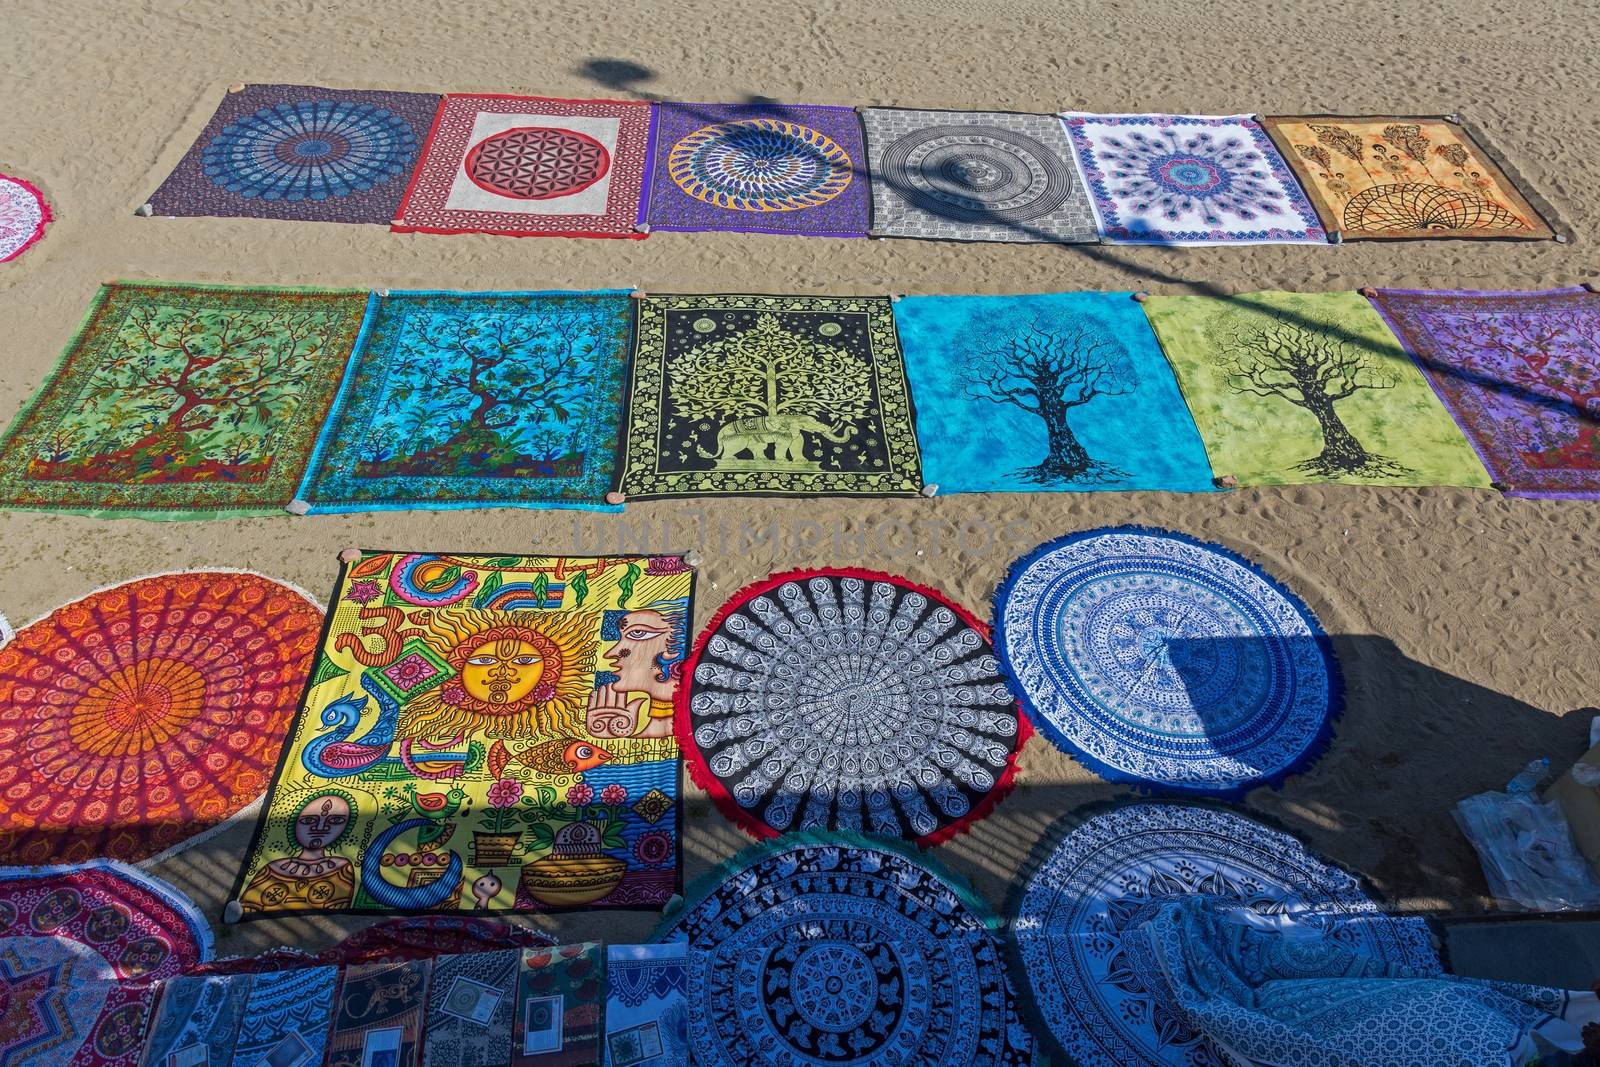 Textiles for sale on the beach in Barcelona of Spain by Digoarpi